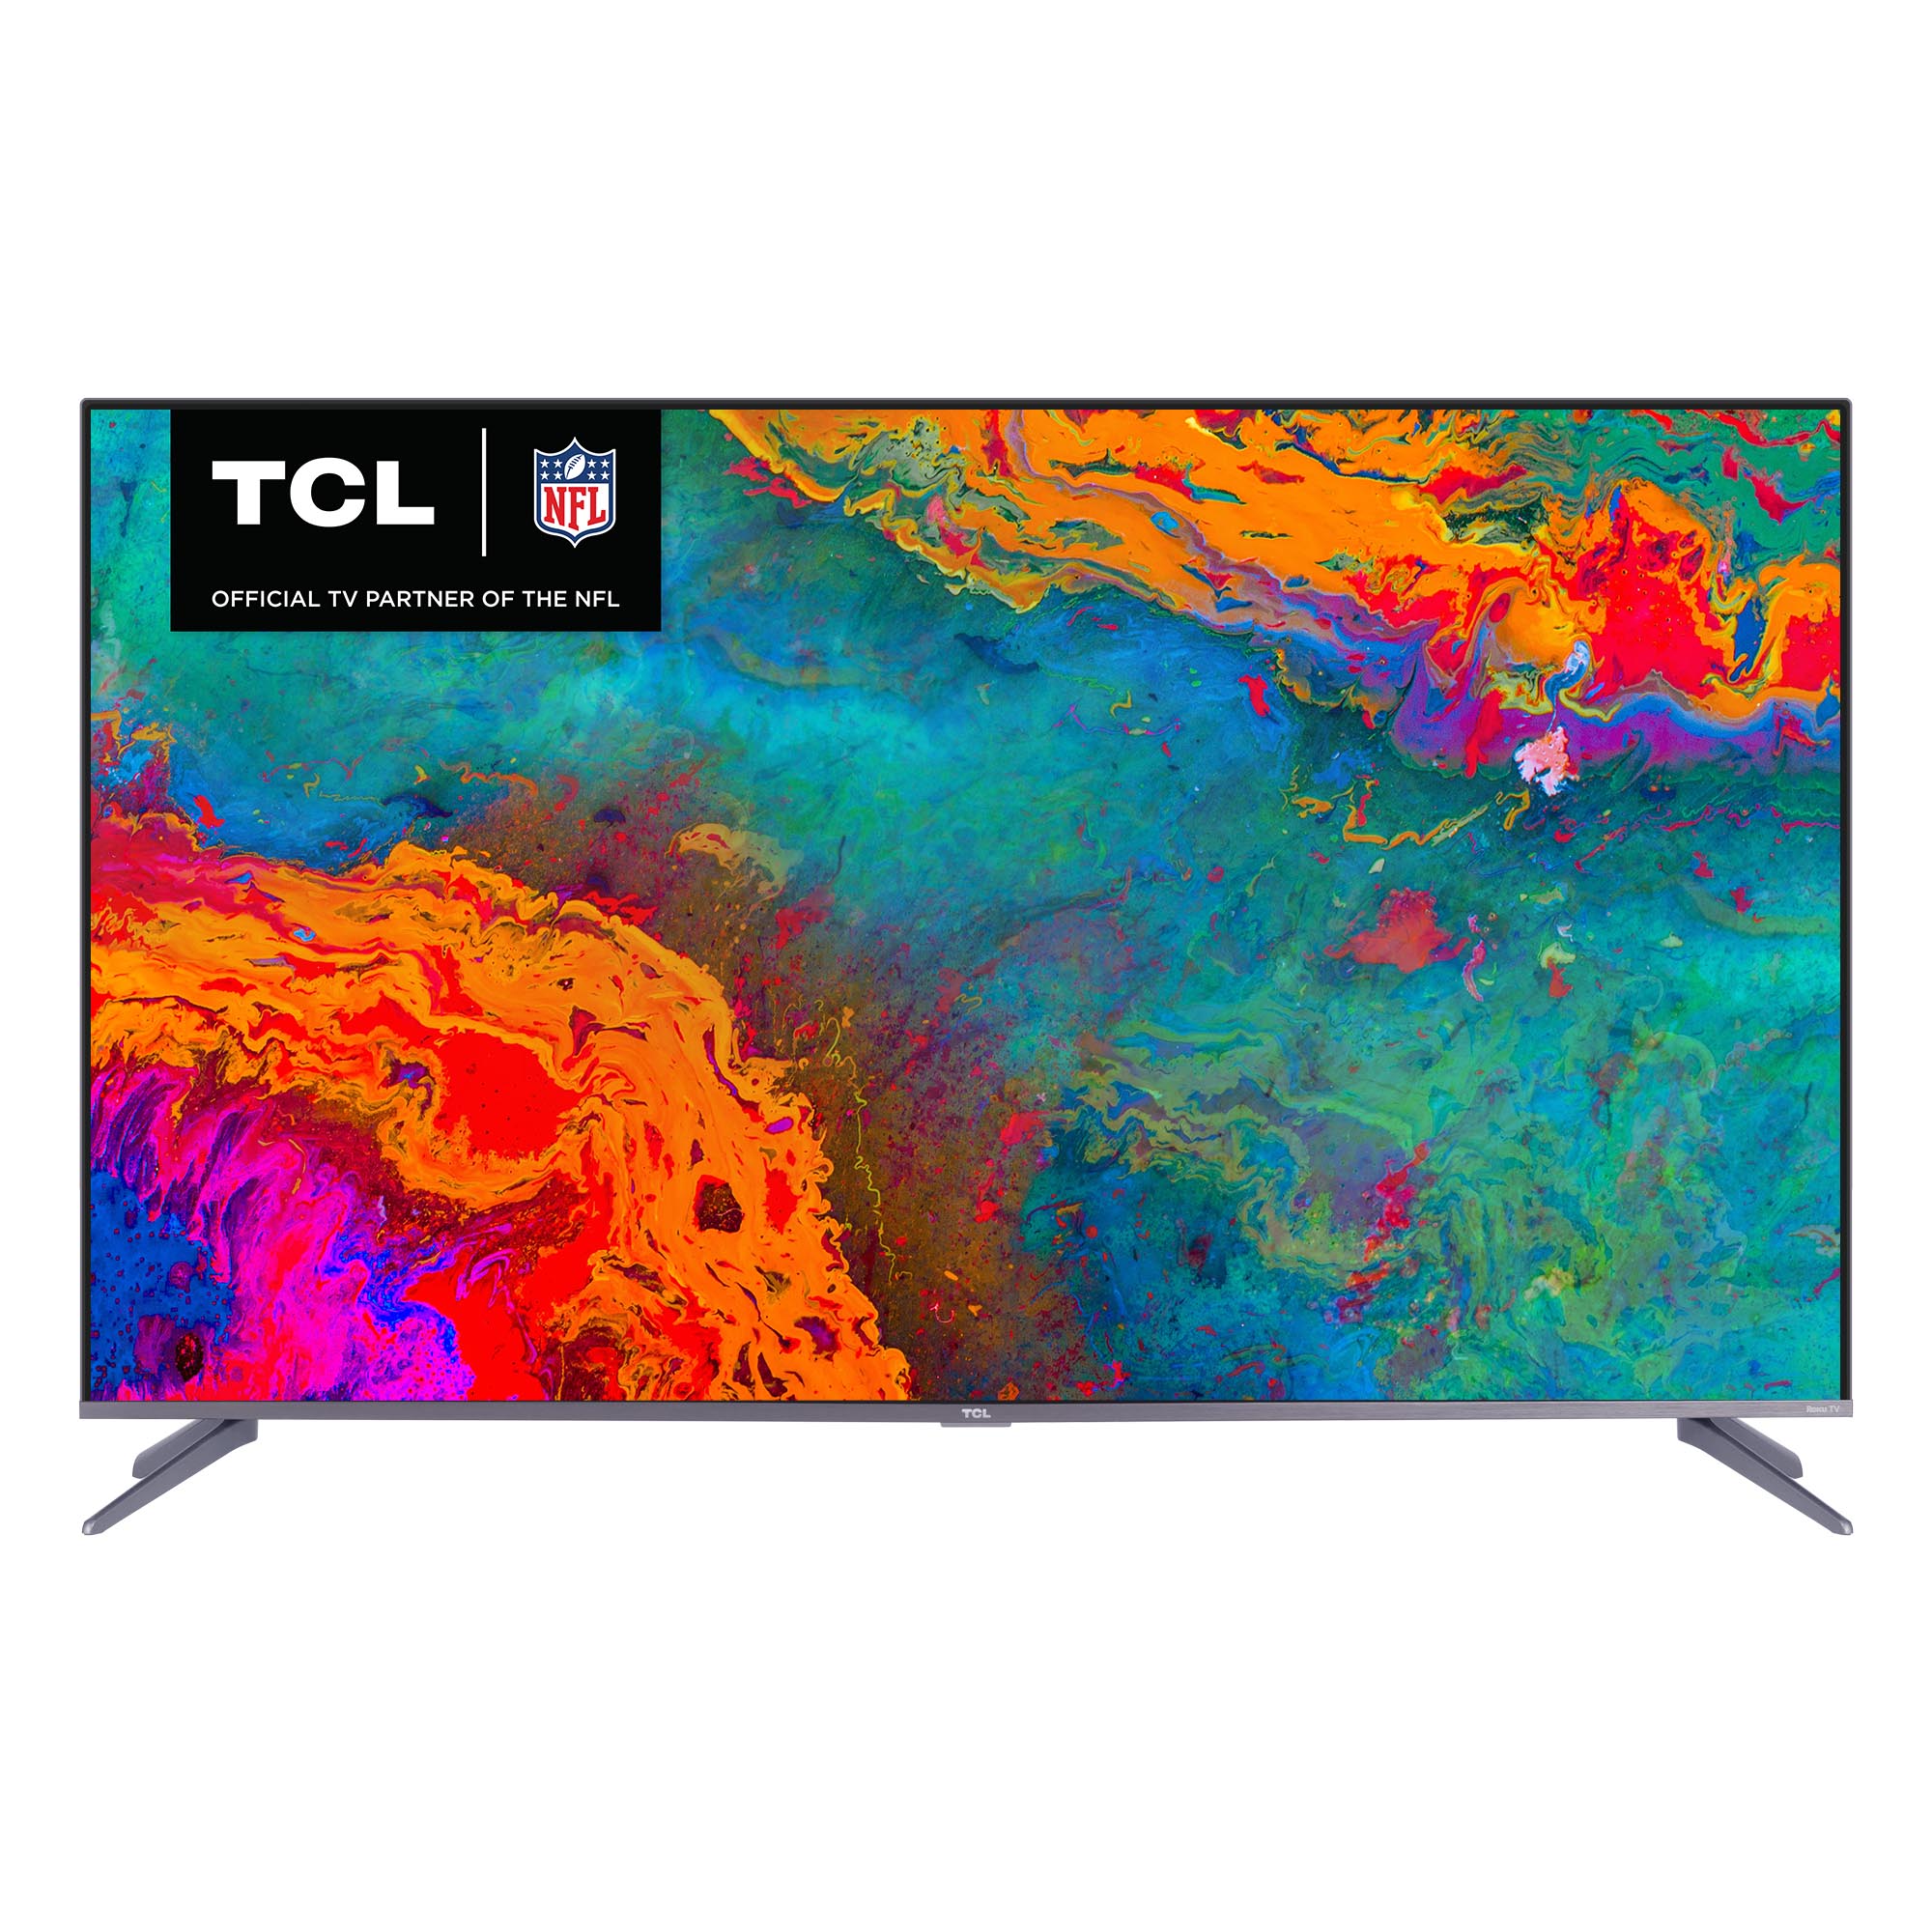 TCL 50" Class 5-Series 4K UHD Dolby Vision HDR QLED Roku Smart TV - 50S535 - image 1 of 11